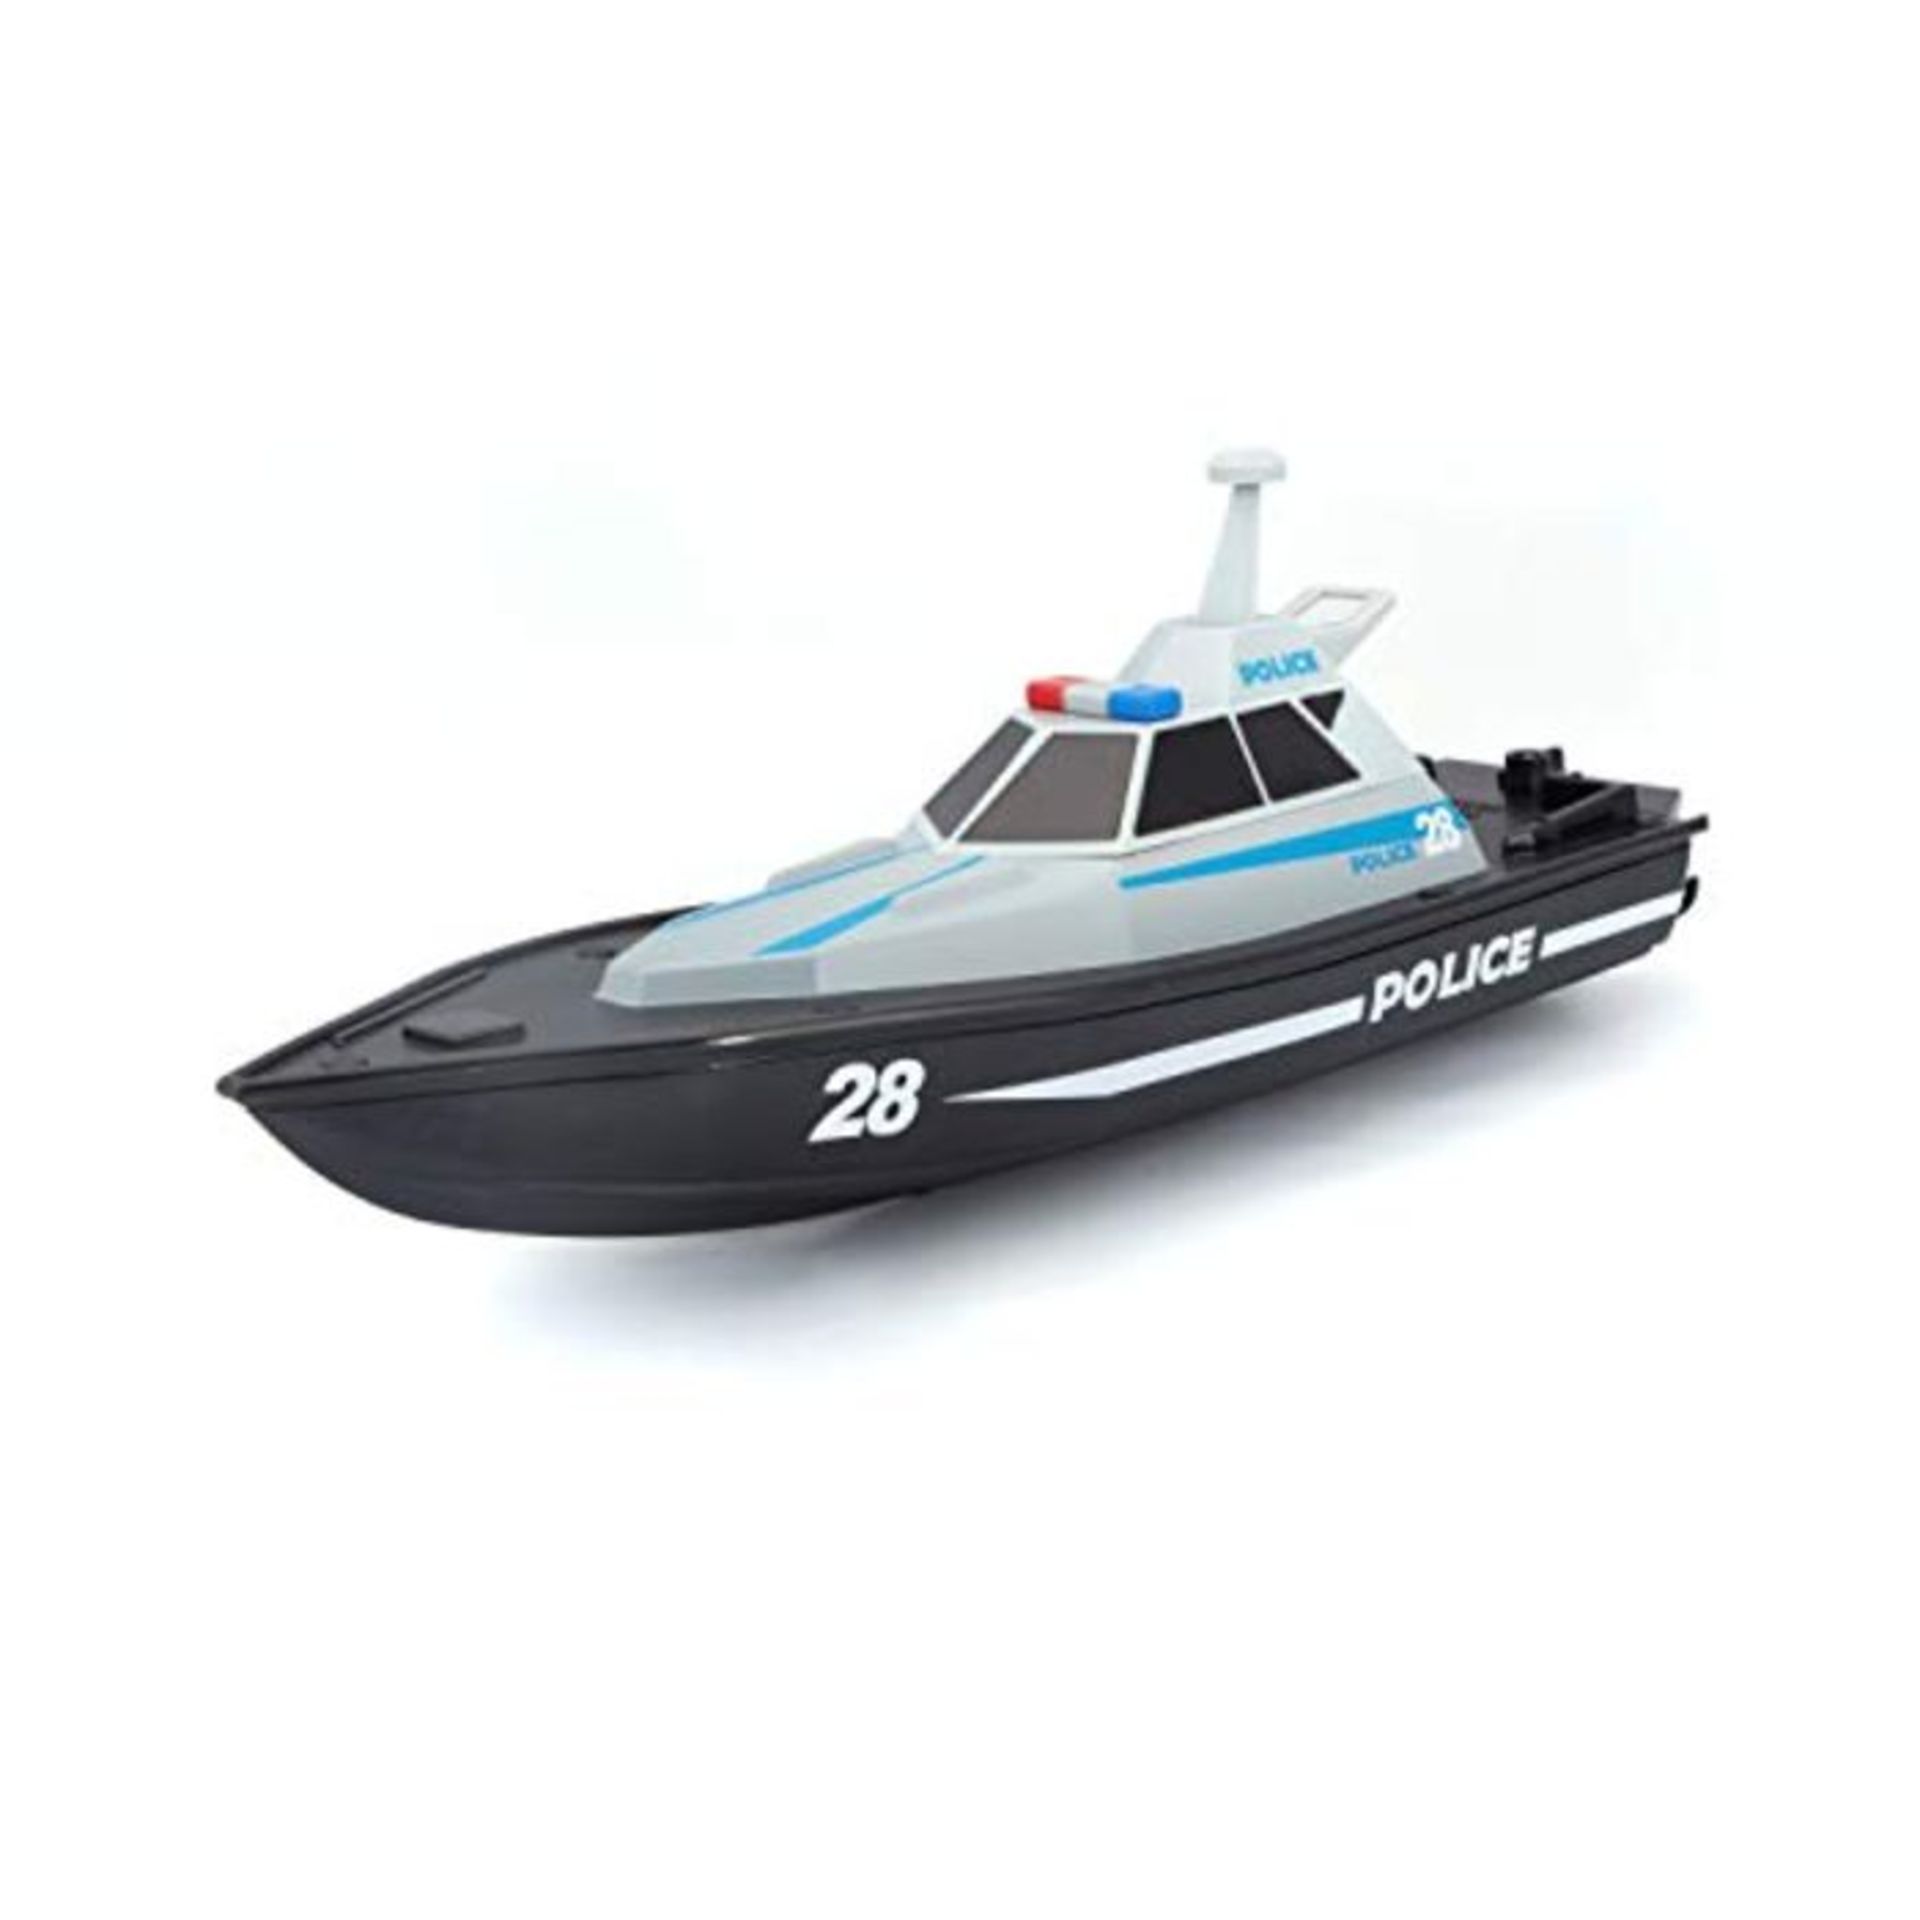 Maisto M82196 RC Police Boat, Assorted Colours